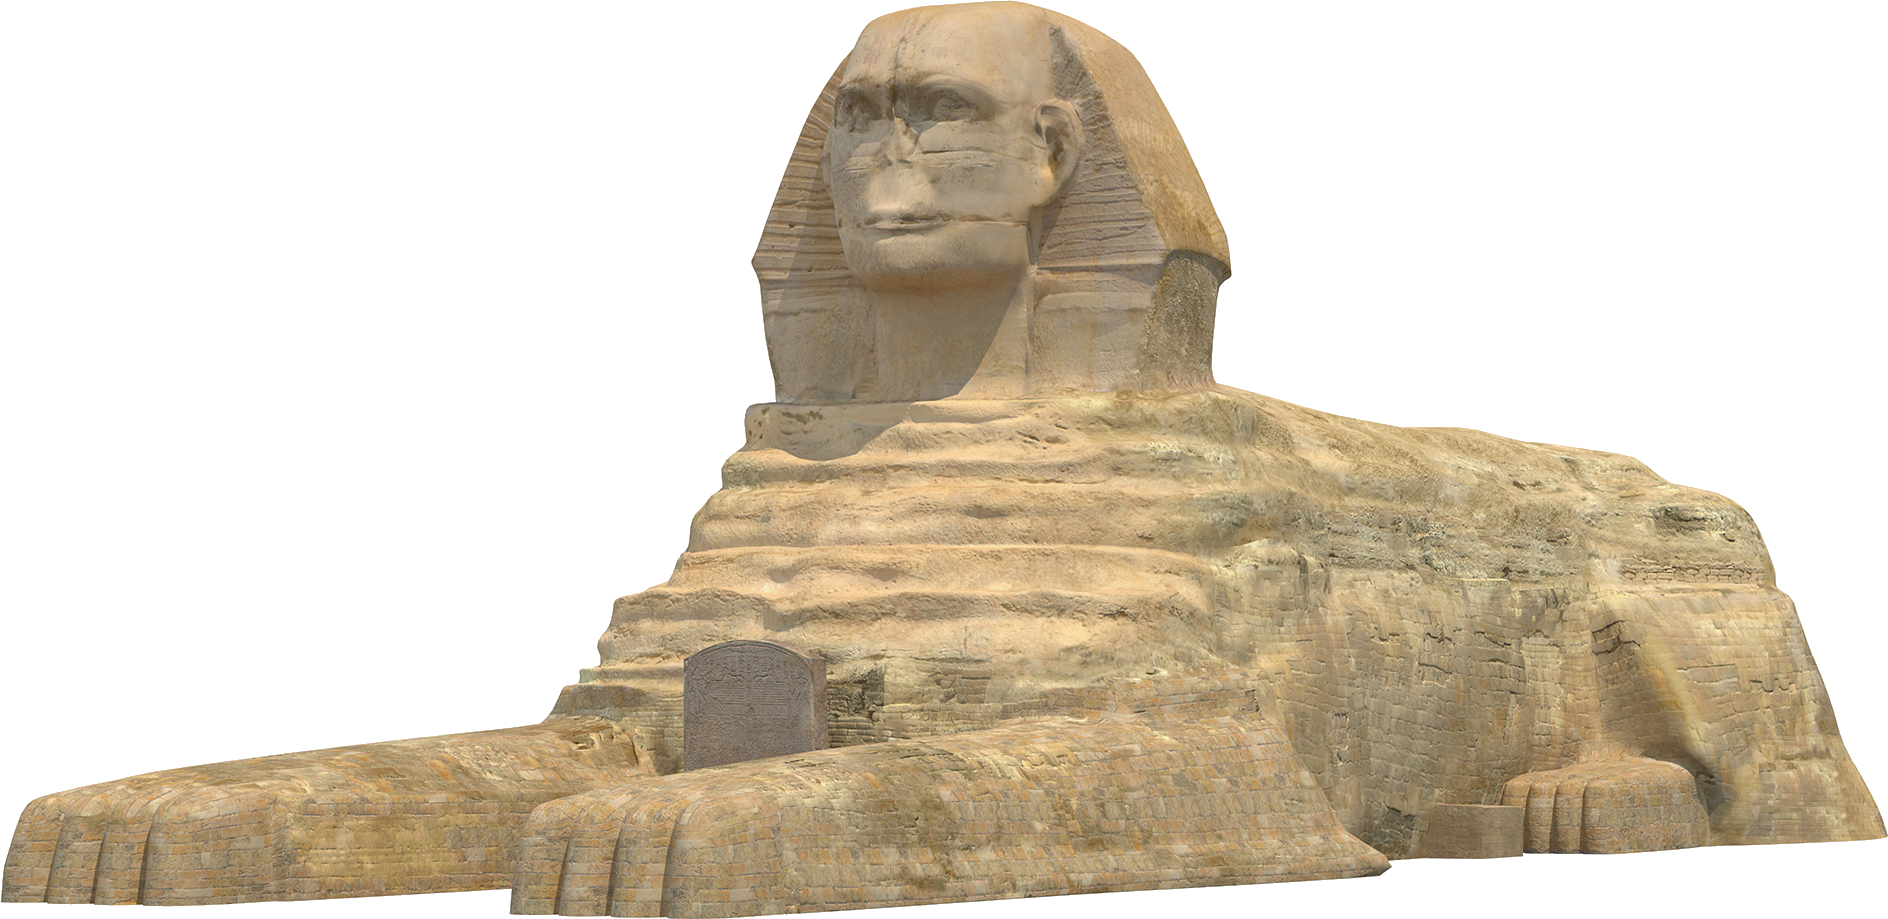 The Great Sphinx Facts - The Sphinx of Giza - The Sphinx History